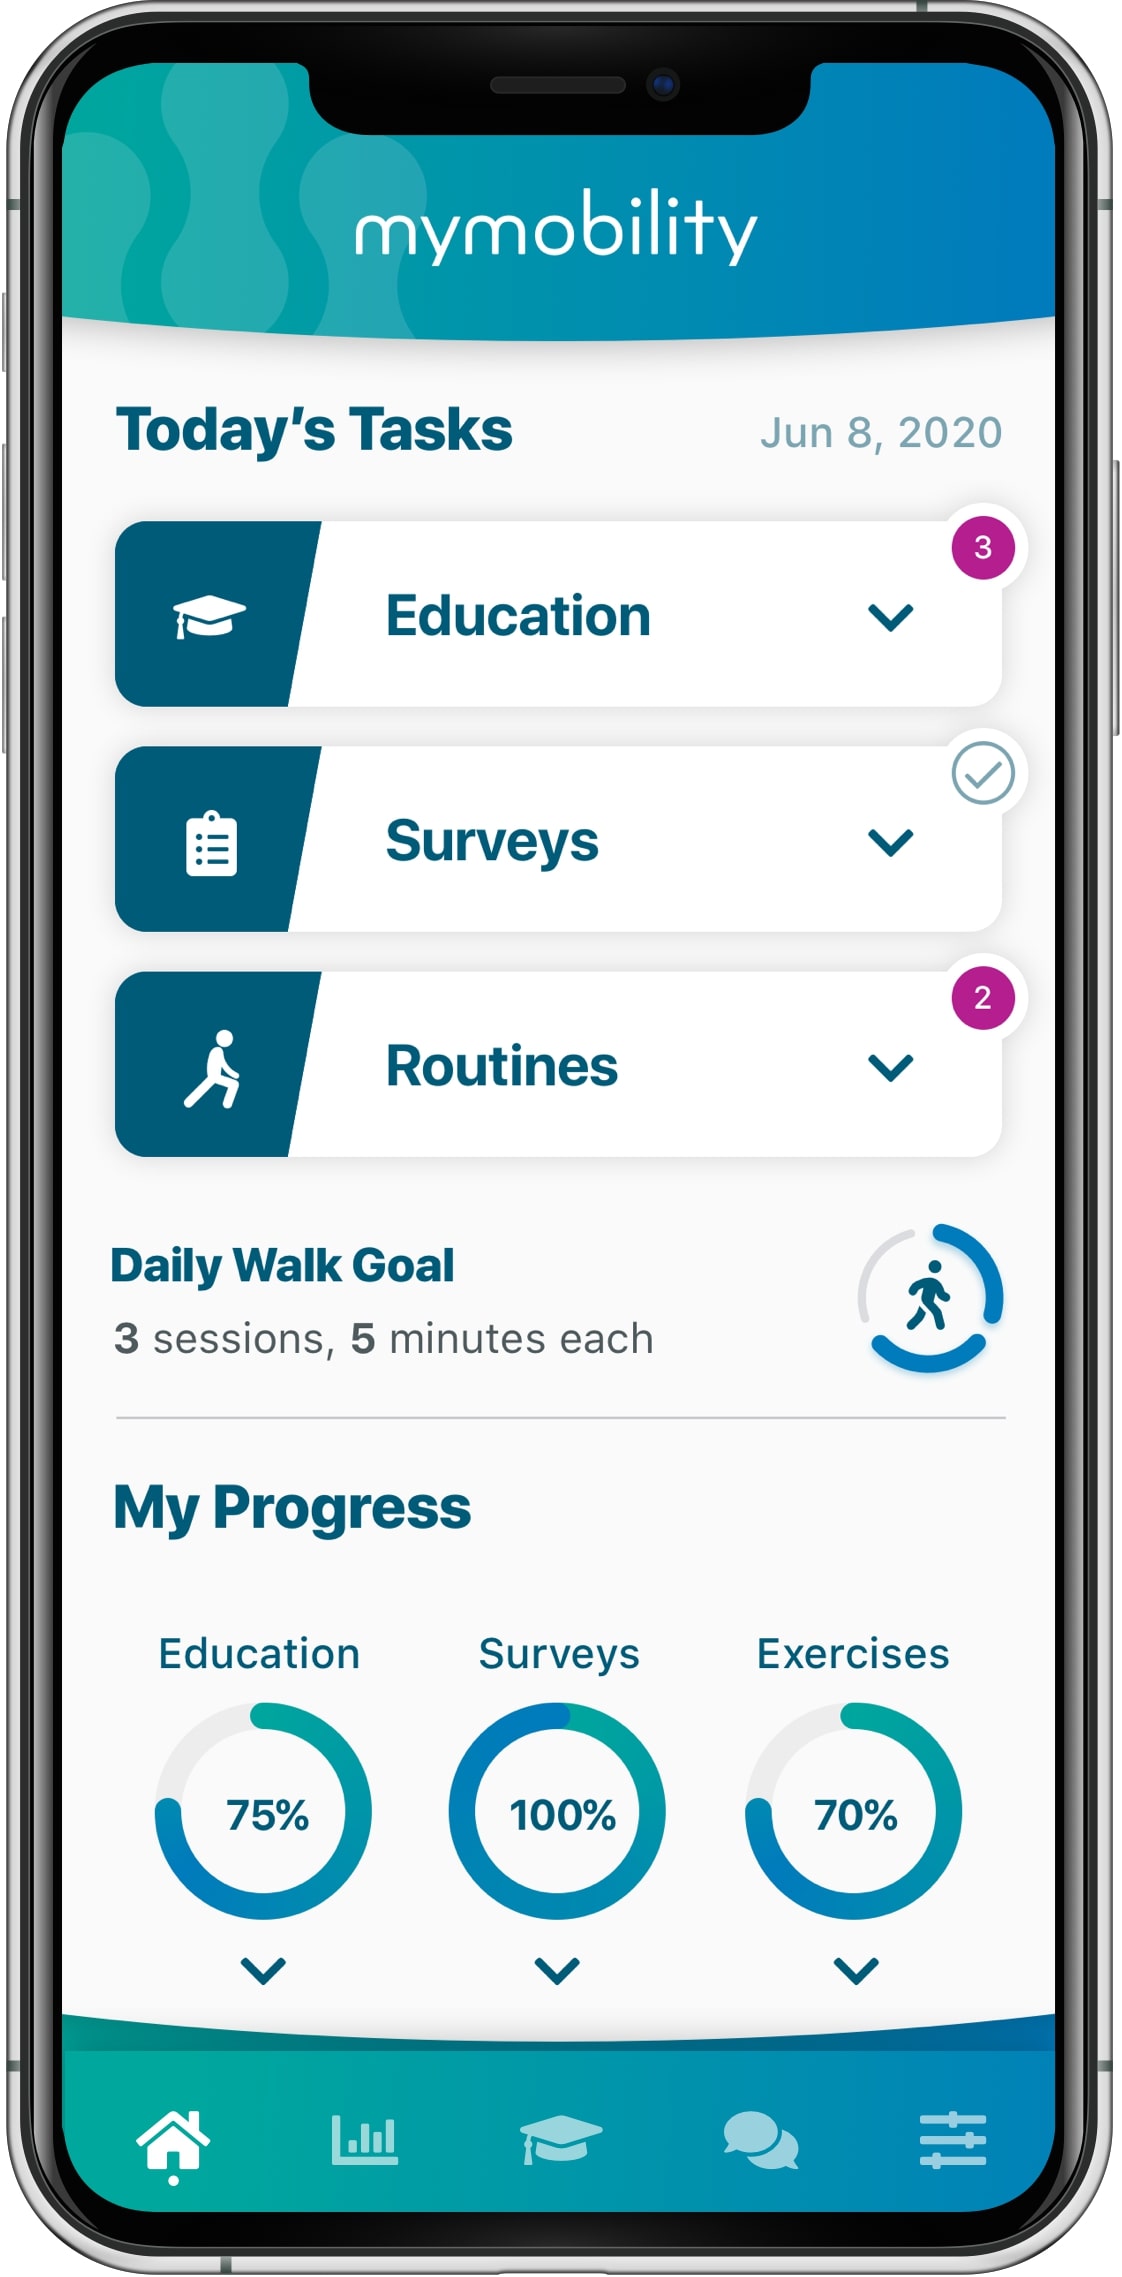 Patients can use the To Do List, track daily walking goals, view prescribed education and exercises, and answer questionnaires (Patient Reported Outcome Measures, PROMs) through the app.